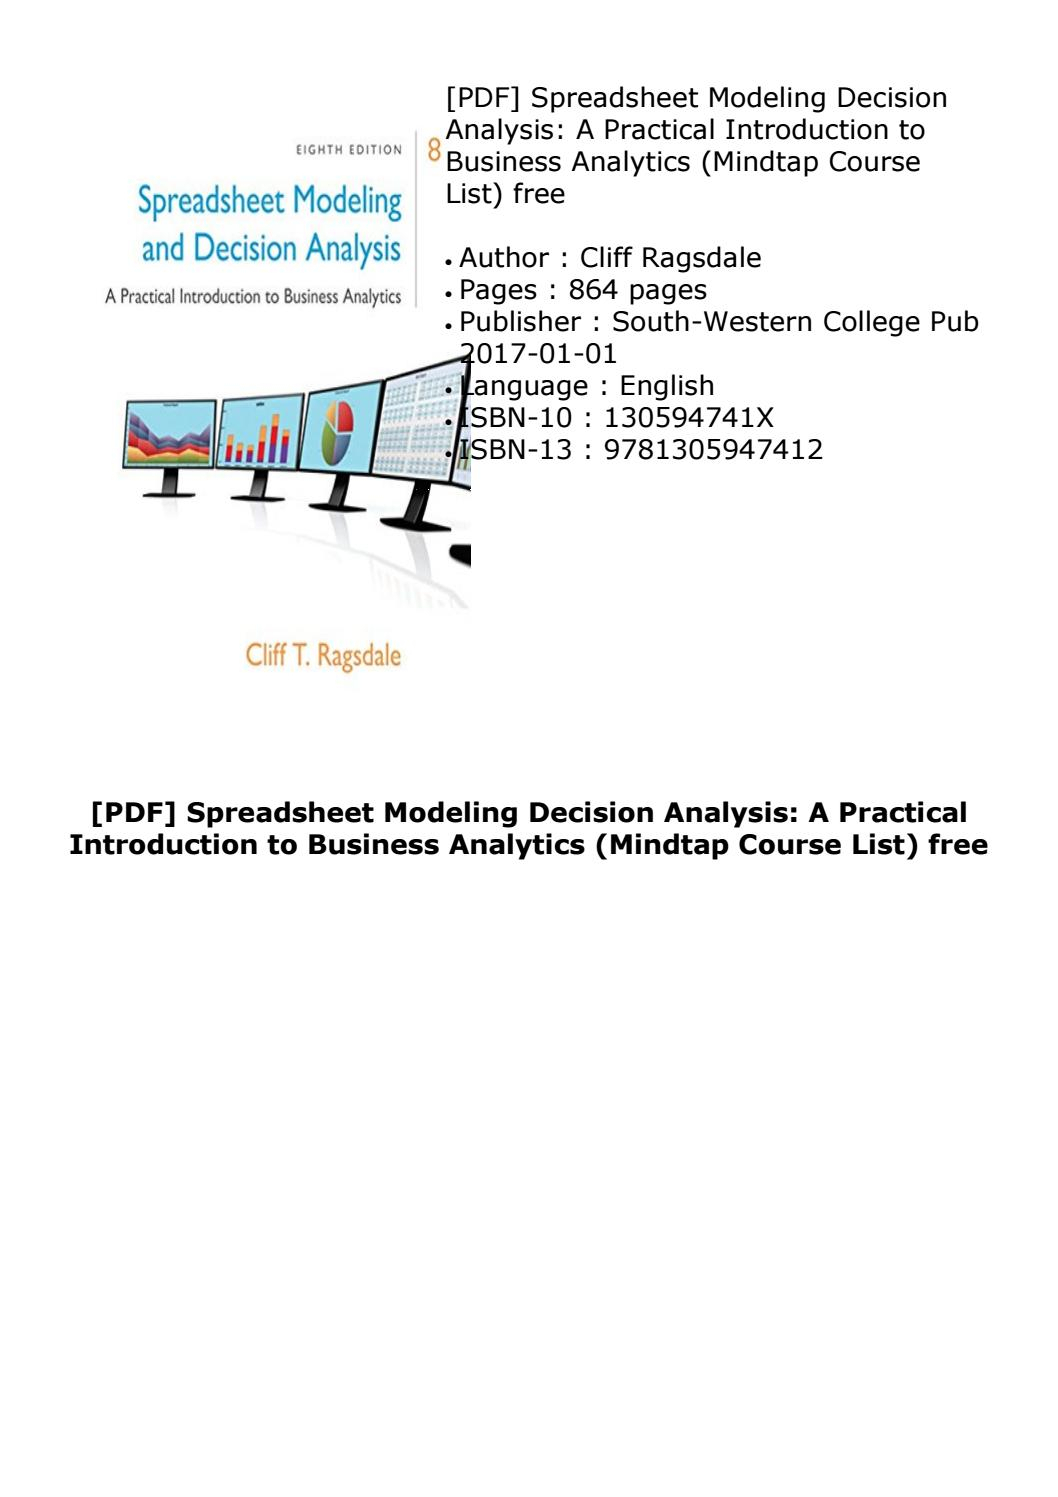 Spreadsheet Modeling And Decision Analysis 8Th Edition Pdf For Pdf] Spreadsheet Modeling Decision Analysis: A Practical